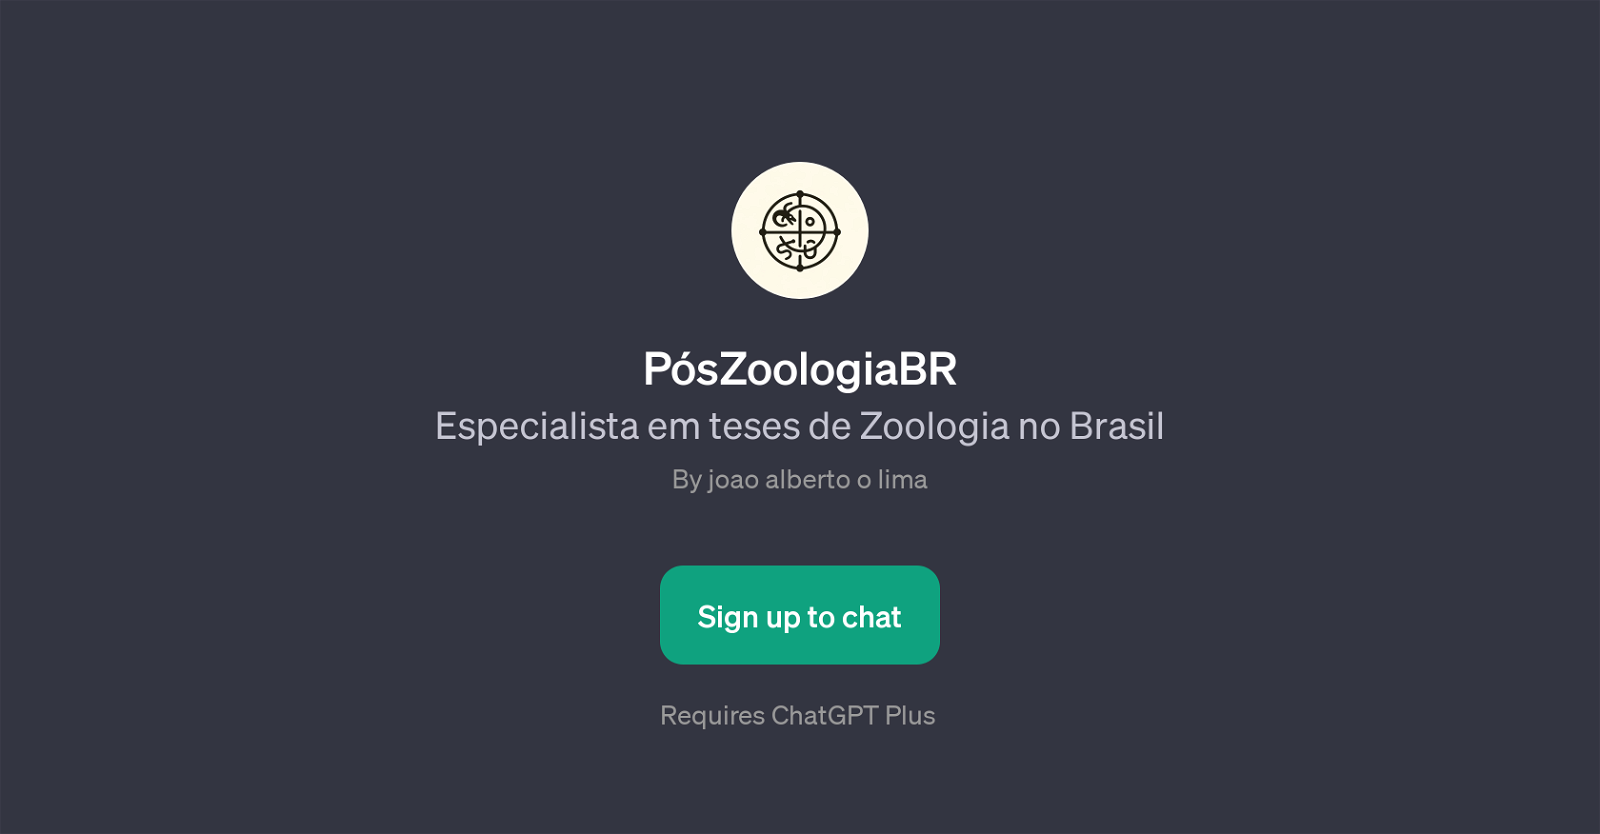 PsZoologiaBR website